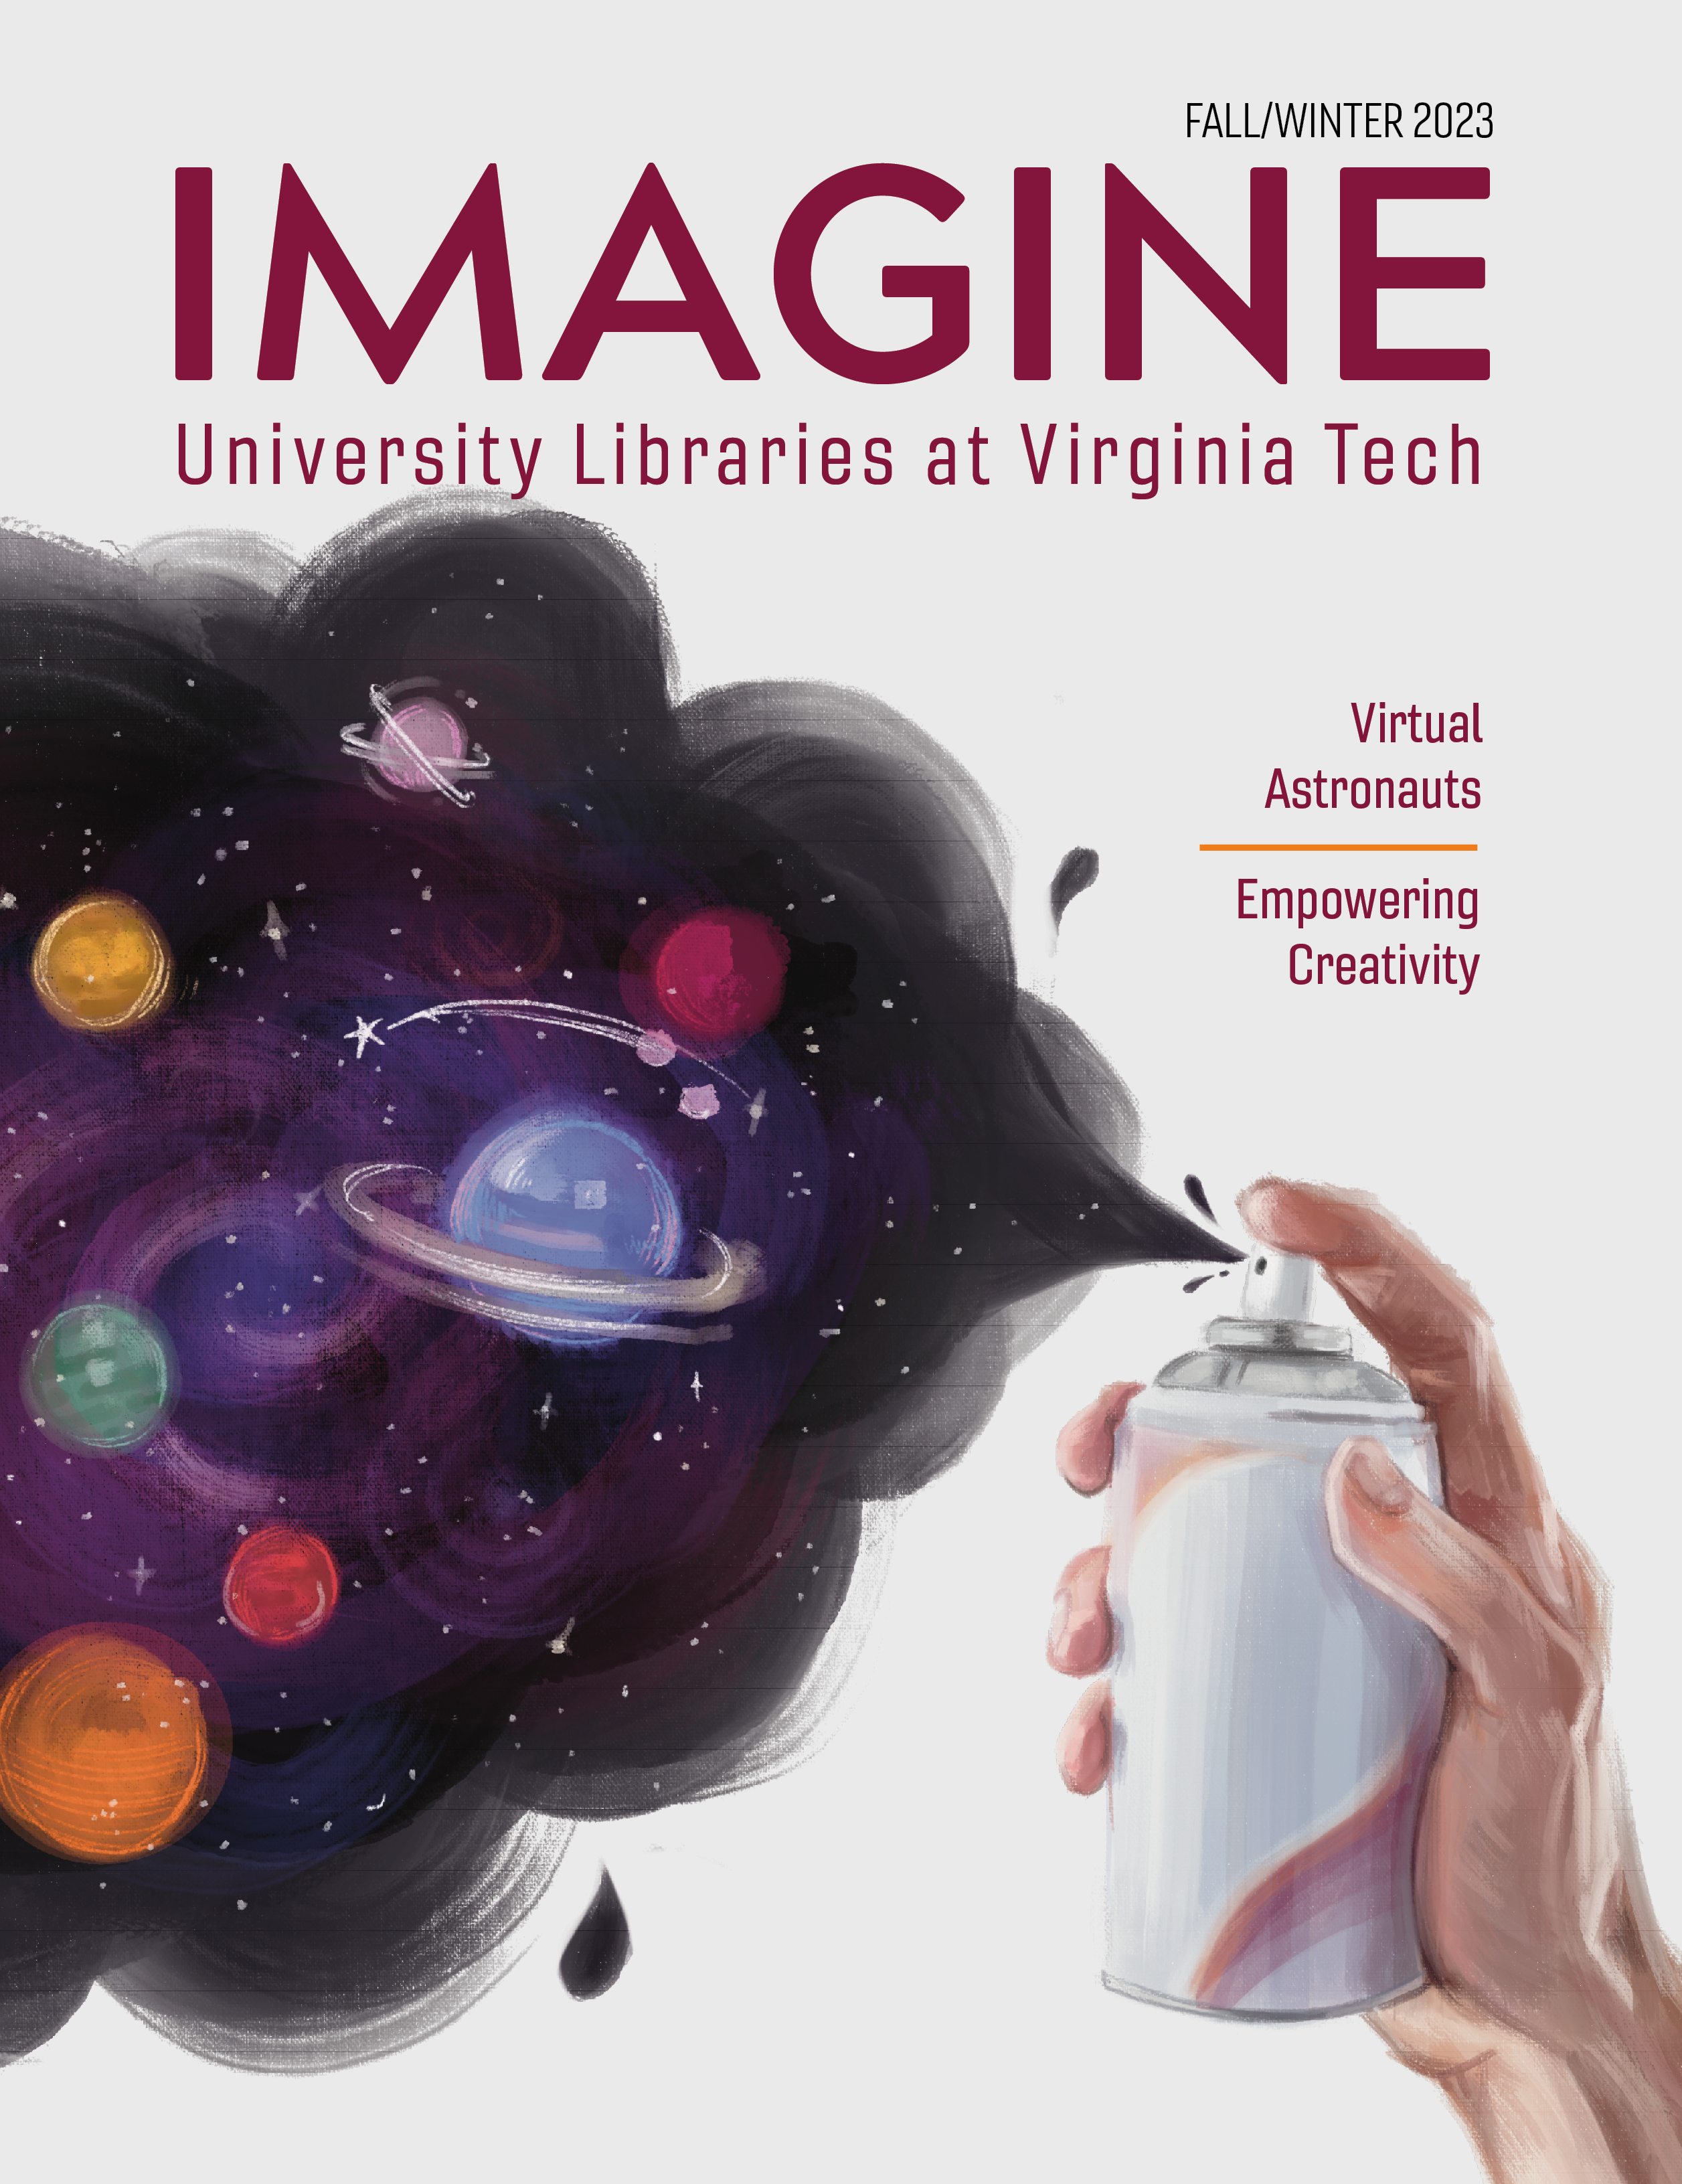 Imagine Magazine_Fall/Winter 2023 cover.  Illustration of spray paint can with space painting